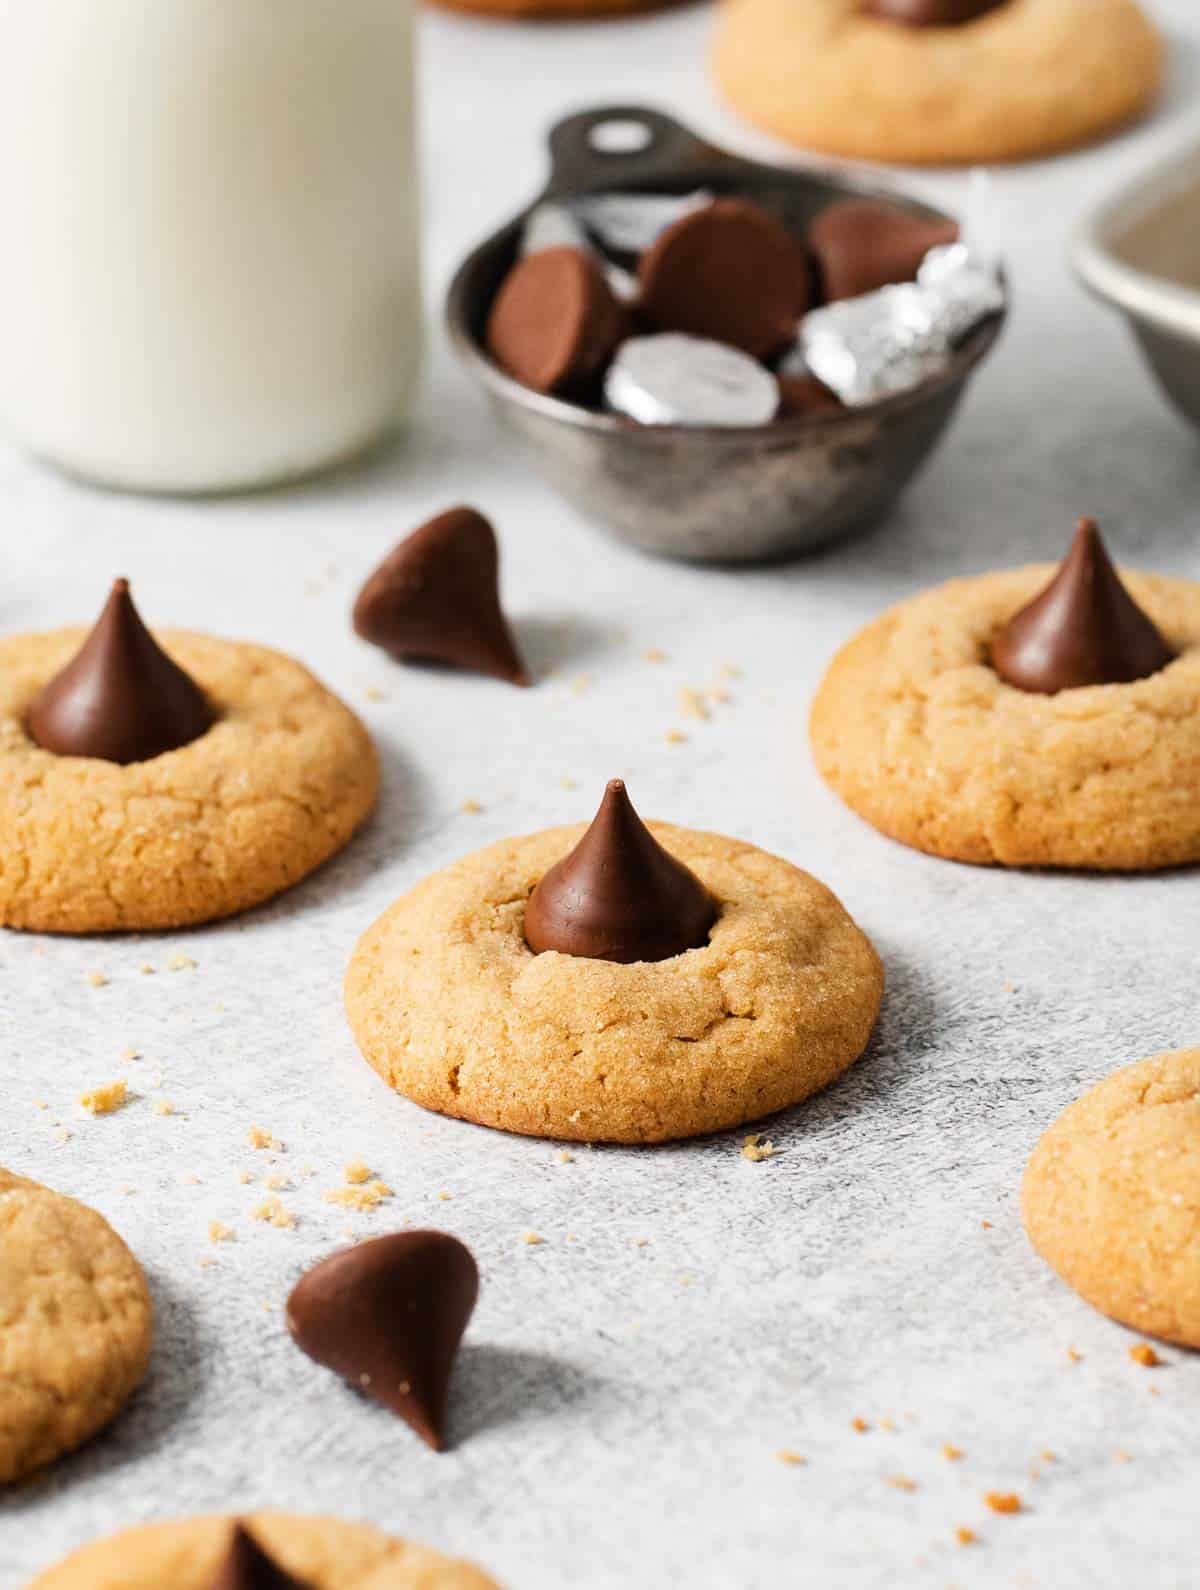 Gluten-free peanut butter blossoms spread out on a counter top